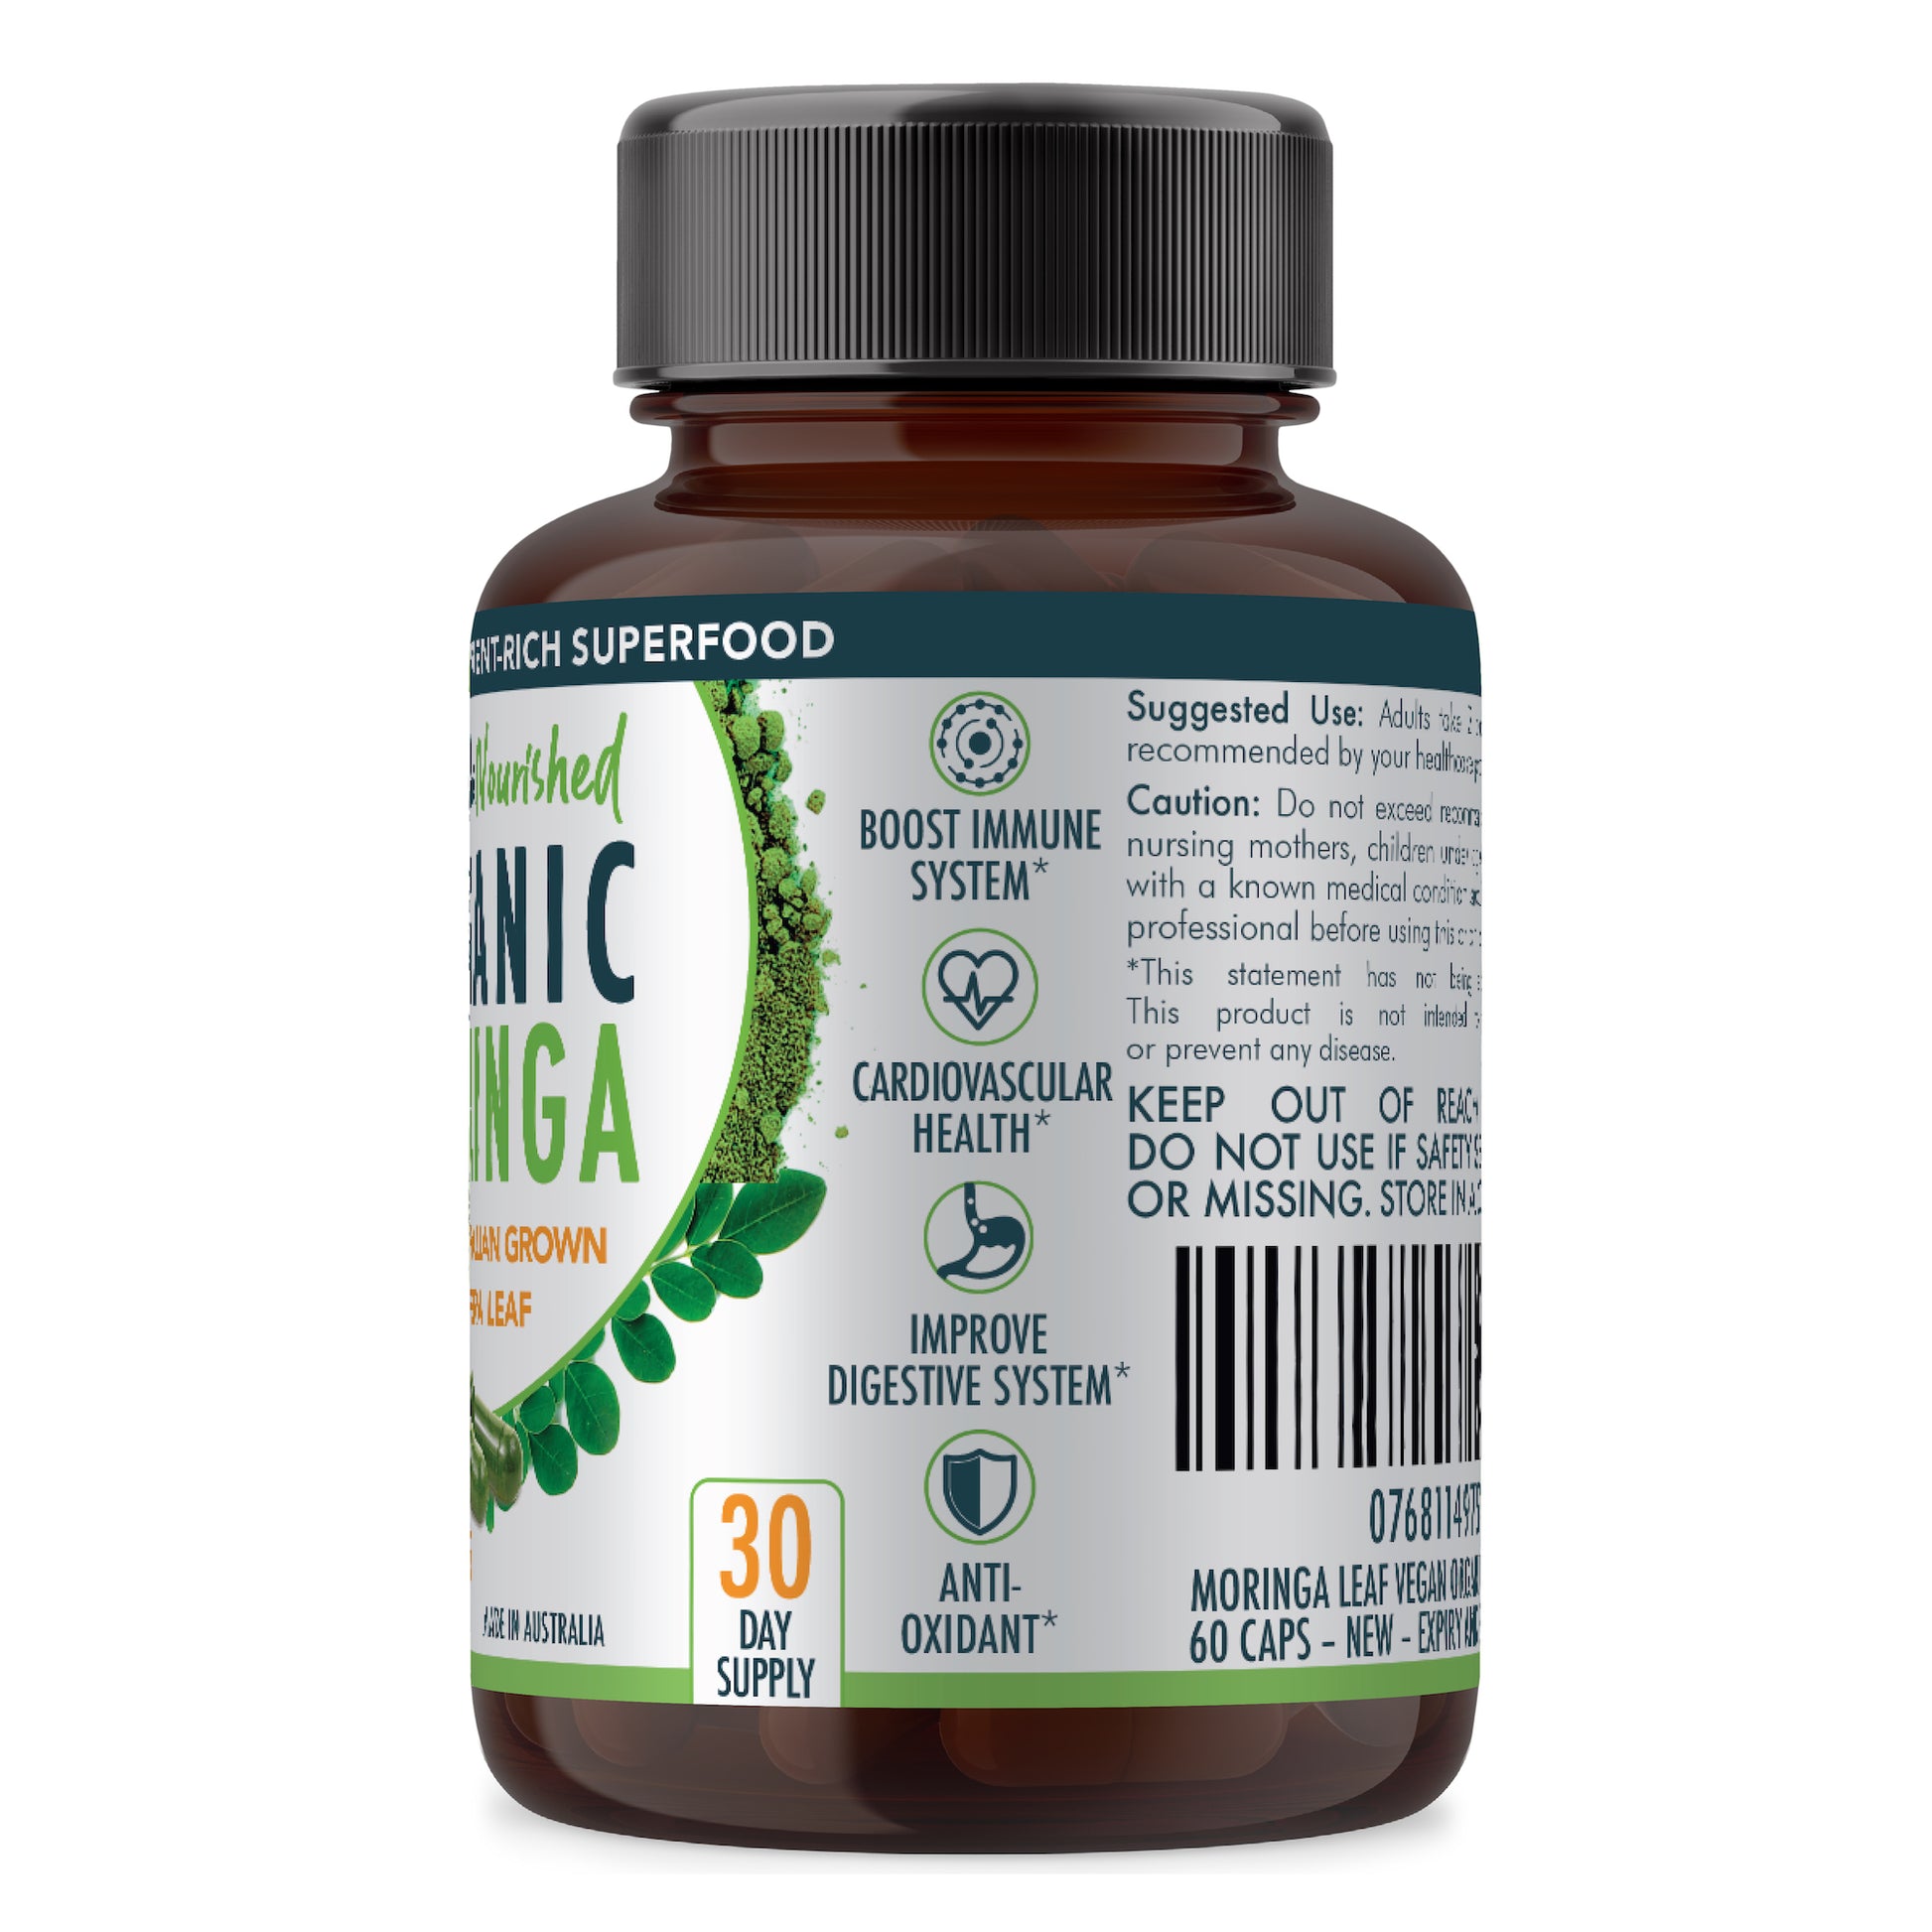 Light Gray Organic Pure Moringa Leaf Capsules - 100% Natural Australian Grown  - contains 13 different vitamins & minerals